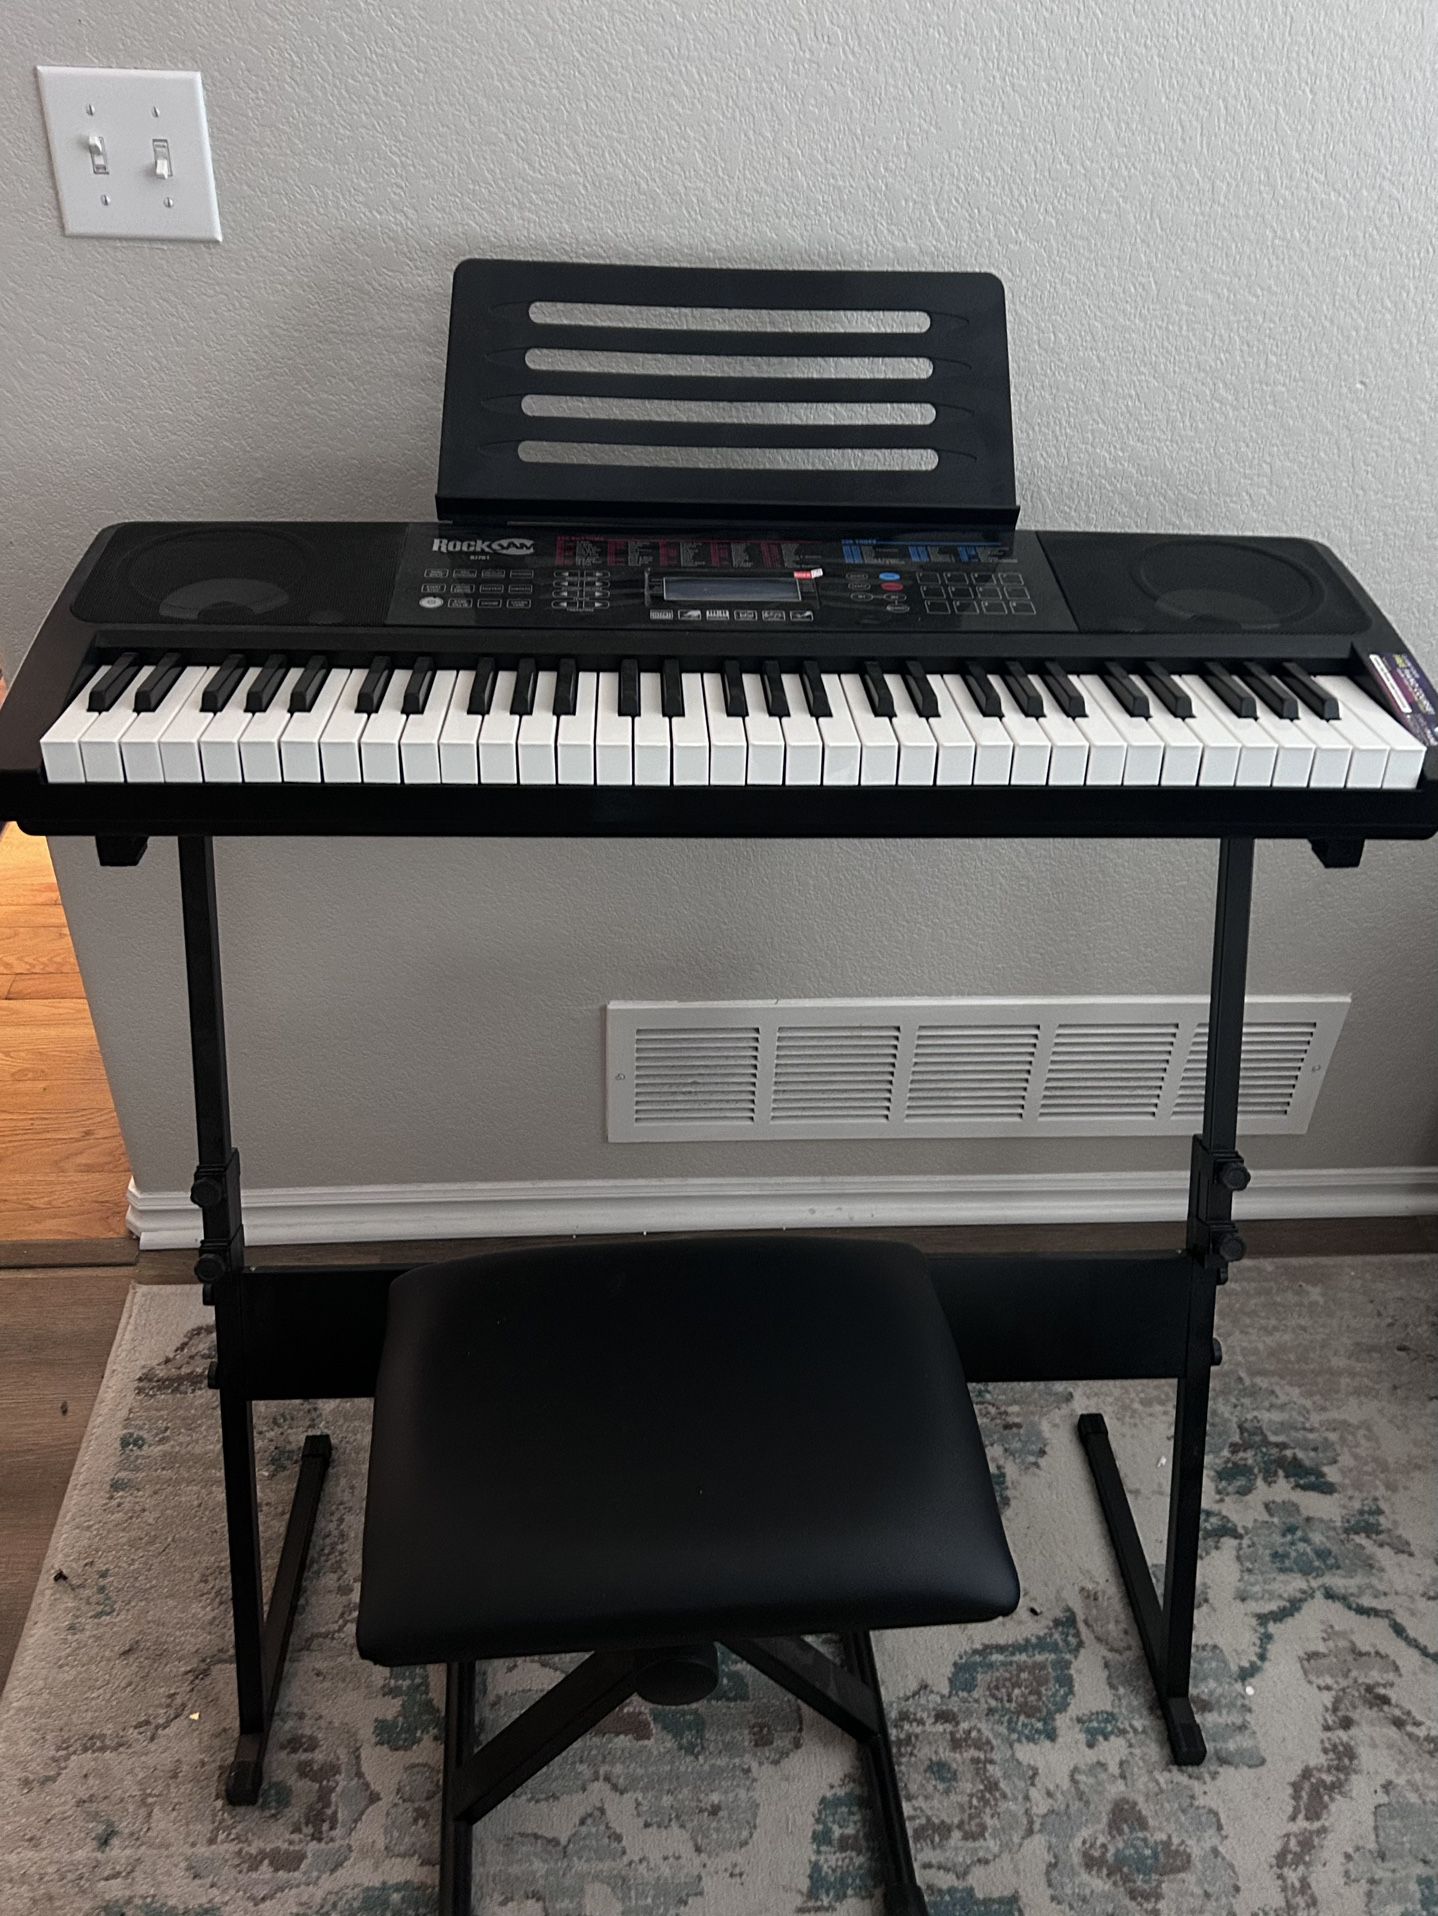 RockJam 61 Key Touch Keyboard Paino w/ Bench, Stand, Headphones, Foot Pedal & Note Stickers